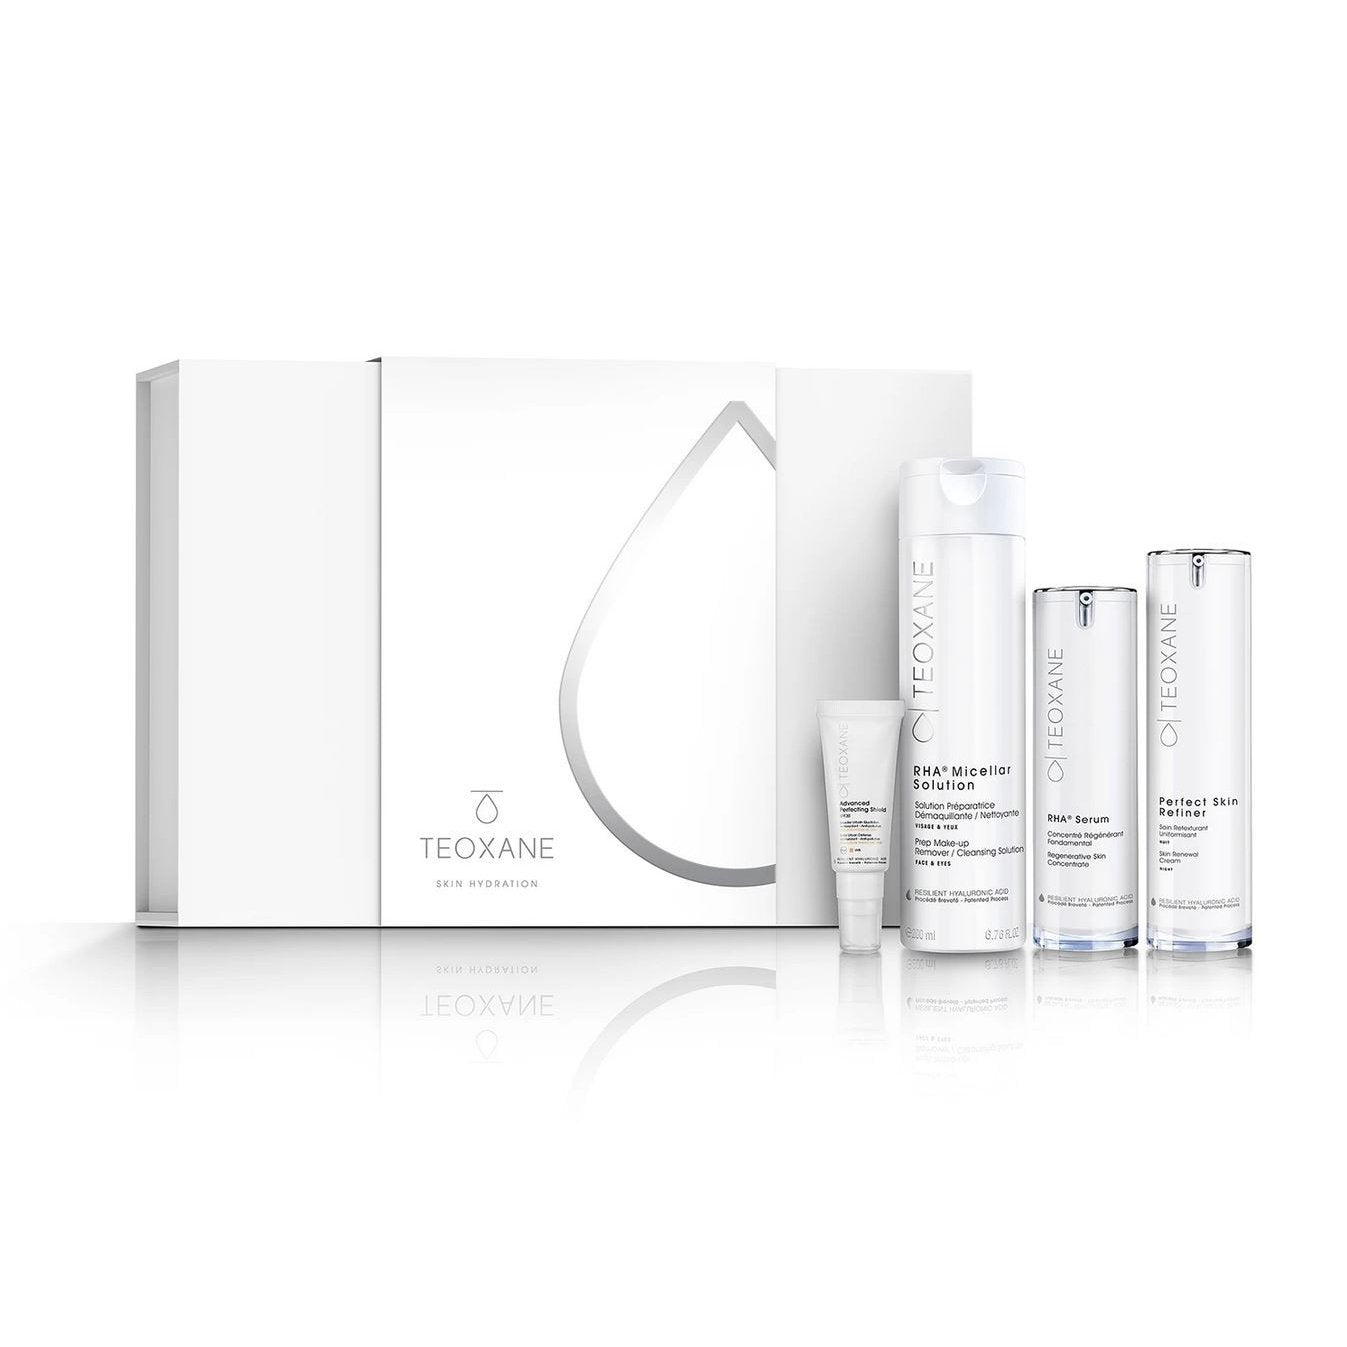 Teoxane Skin Hydration Gift Collection-The Facial Rejuvenation Clinic